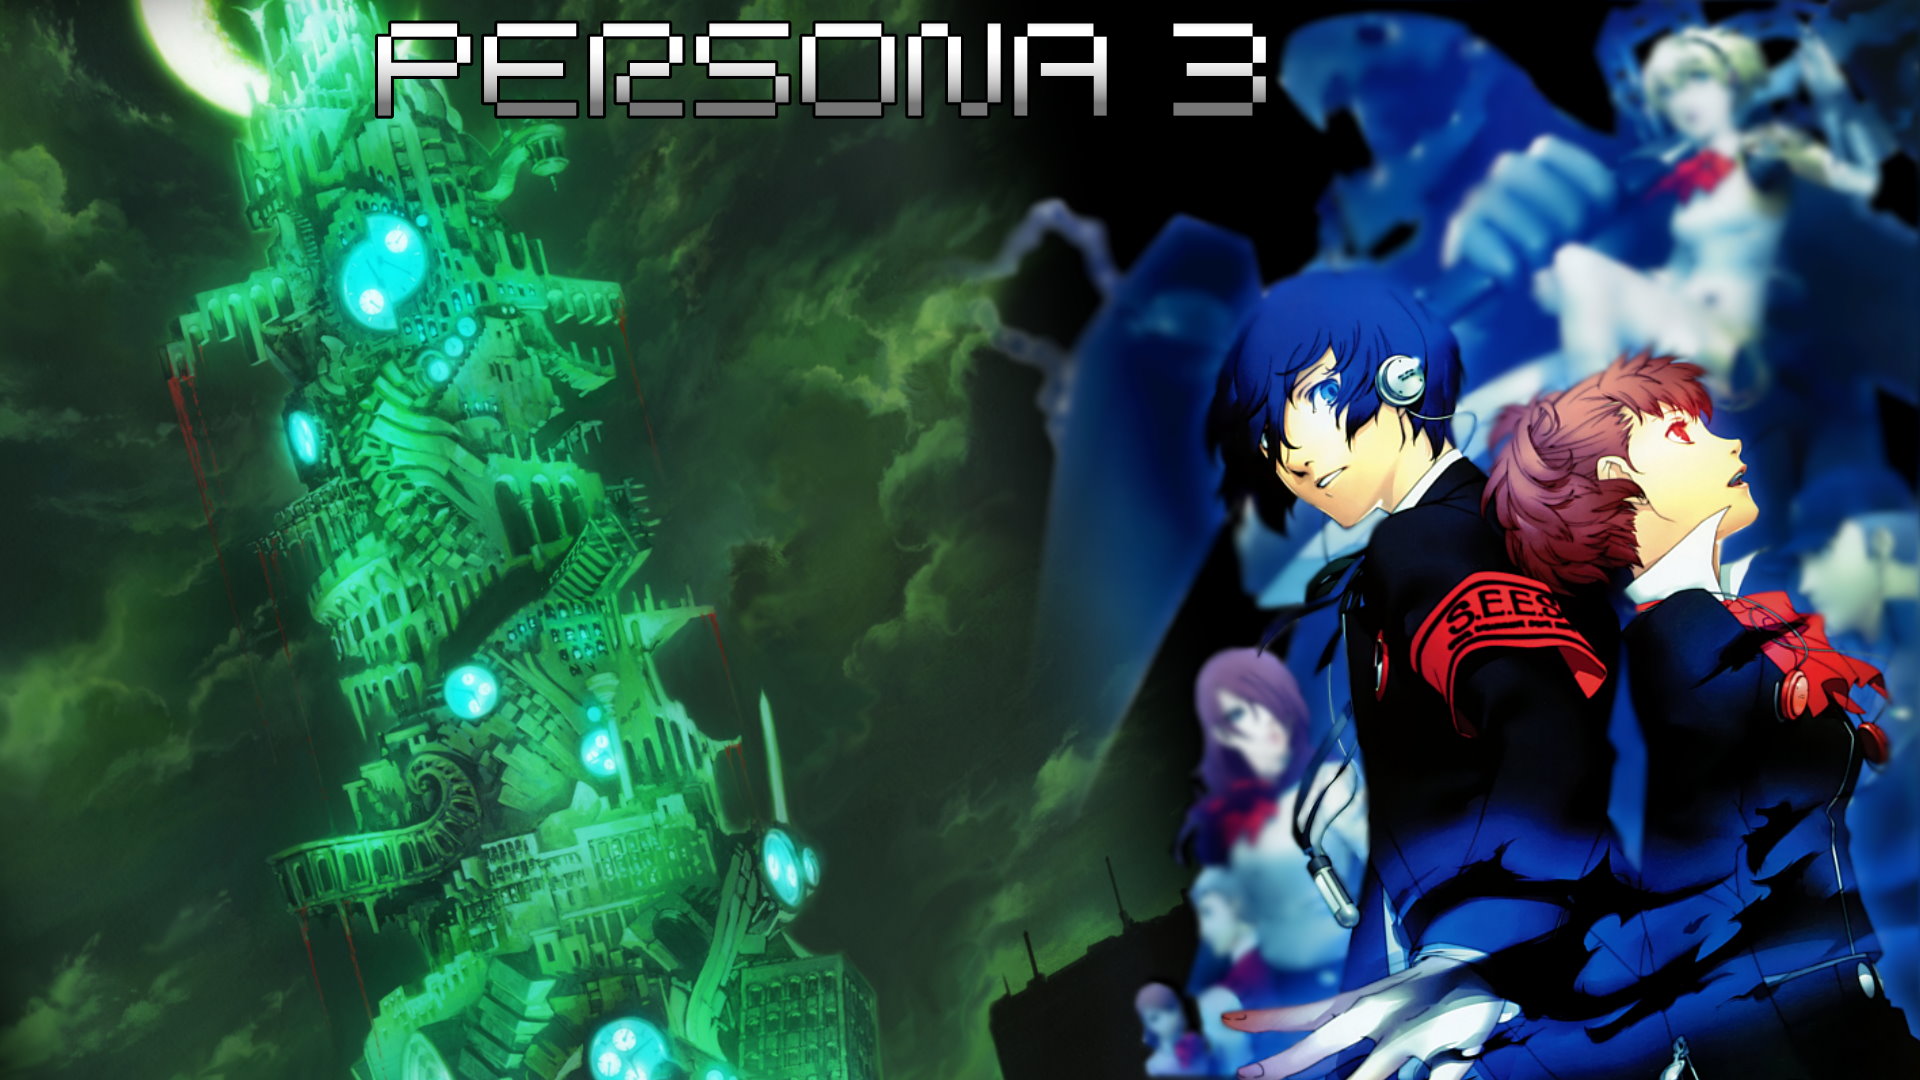 Free Download Hd19x1080 19x1080 For Your Desktop Mobile Tablet Explore 48 Persona 5 Hd Wallpaper Persona 3 Wallpaper Persona 4 Wallpapers Persona 4 Hd Wallpaper